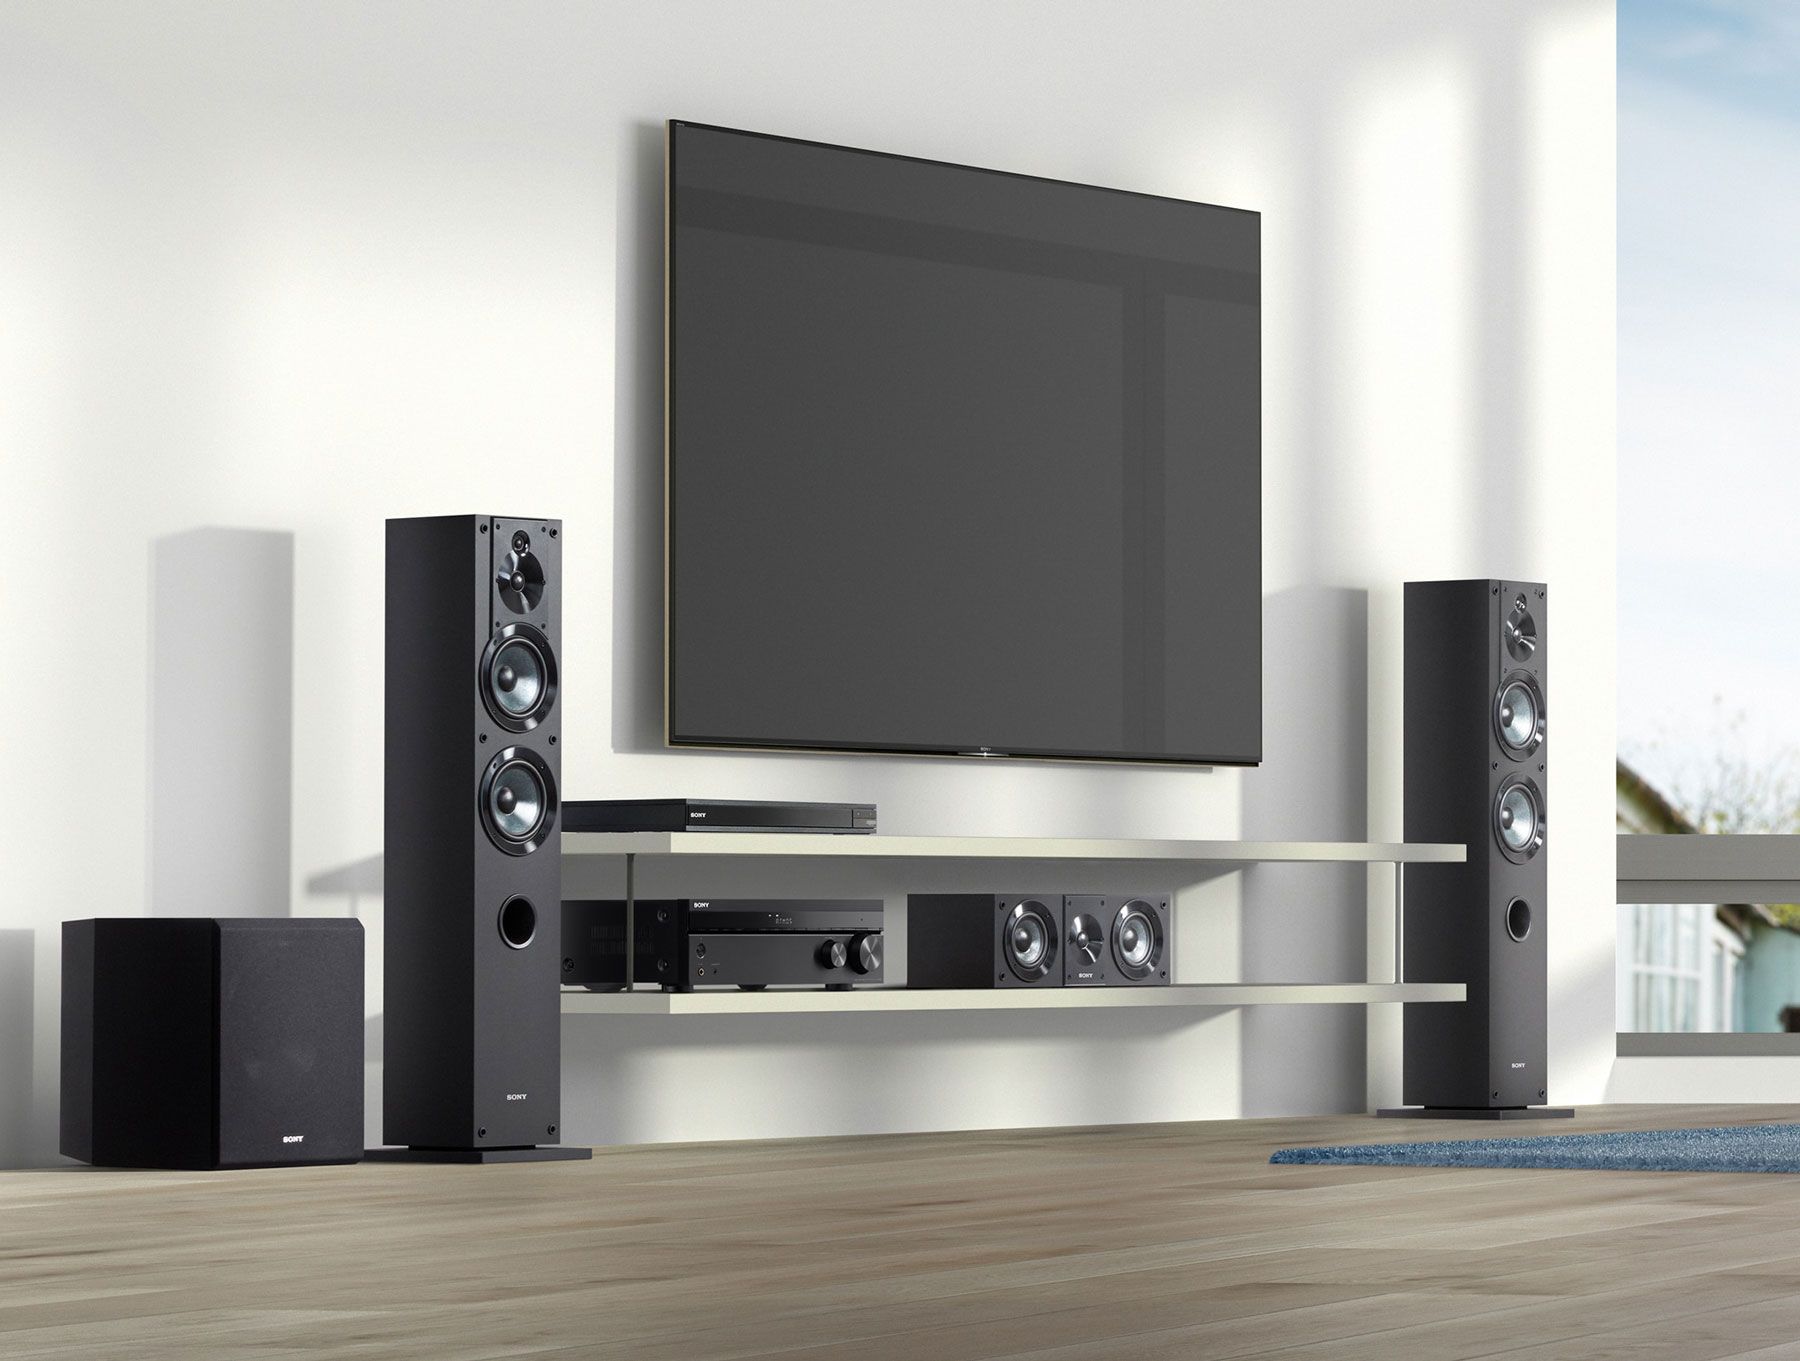 Sony TV and Audio System